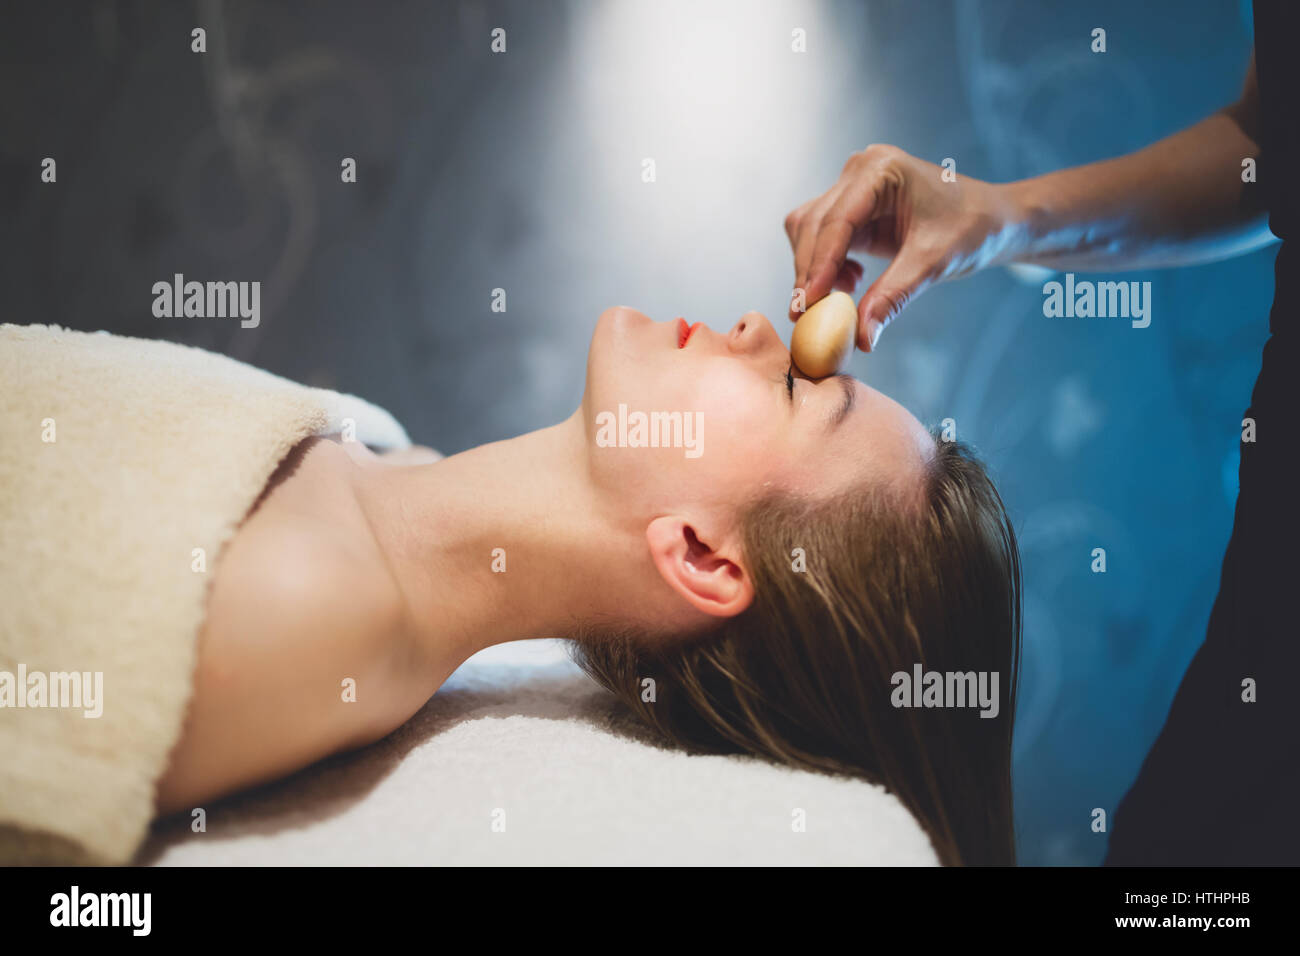 Masseur massaging face with heated wooden objects Stock Photo